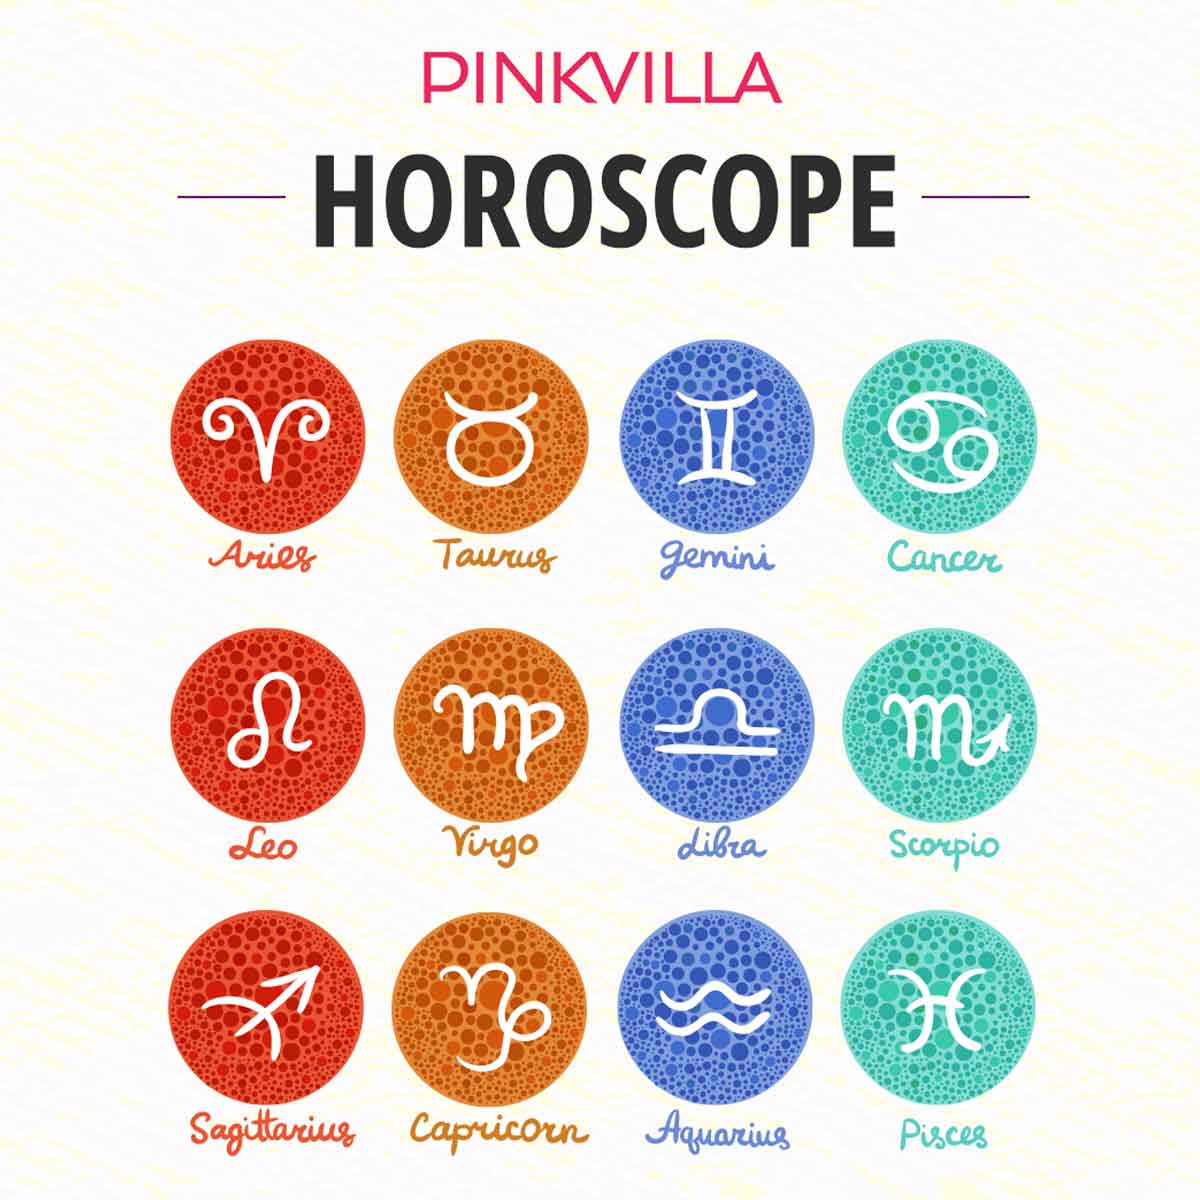 Horoscope Today, March 24, 2022